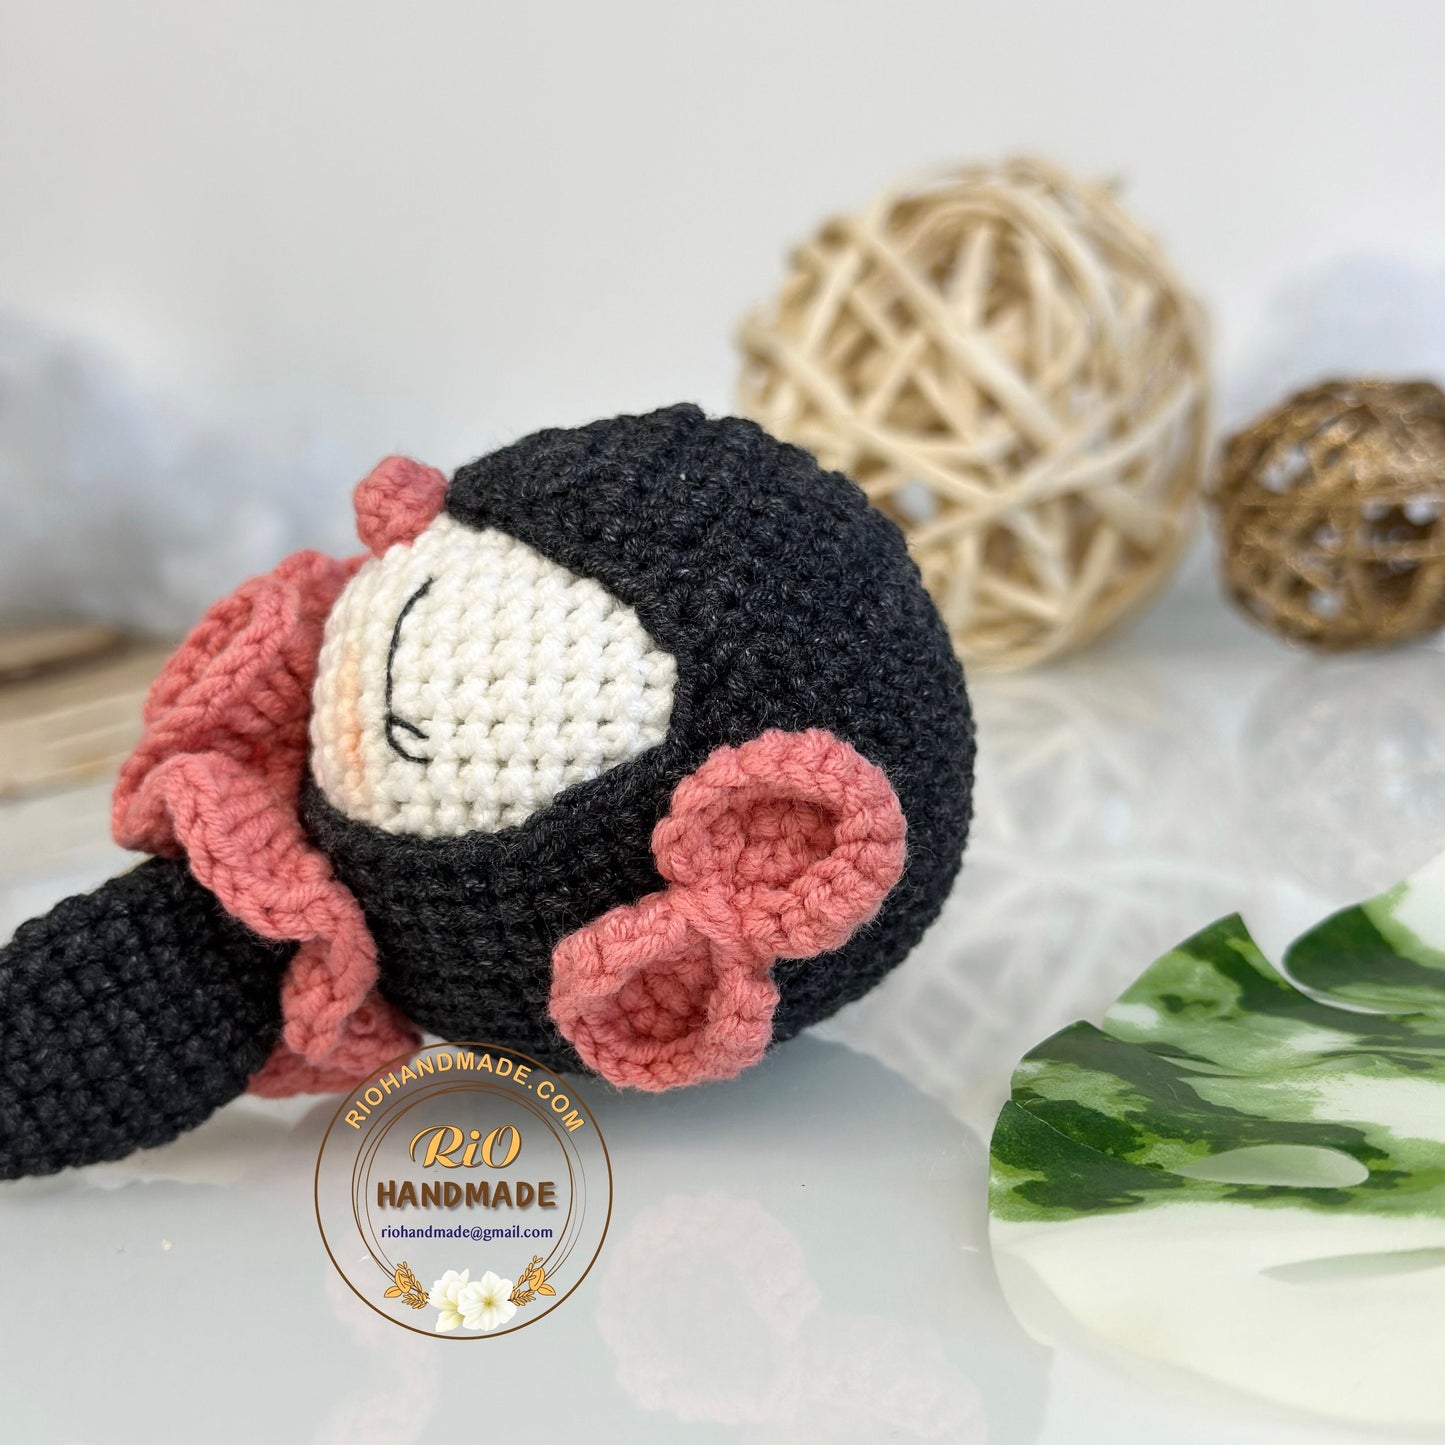 Personalized Baby Rattle, Crochet Penguin Rattle and Matching Toy, Animal Newborn Baby Rattle, Baby Crochet Rattle Gift, Baby Shower Gift